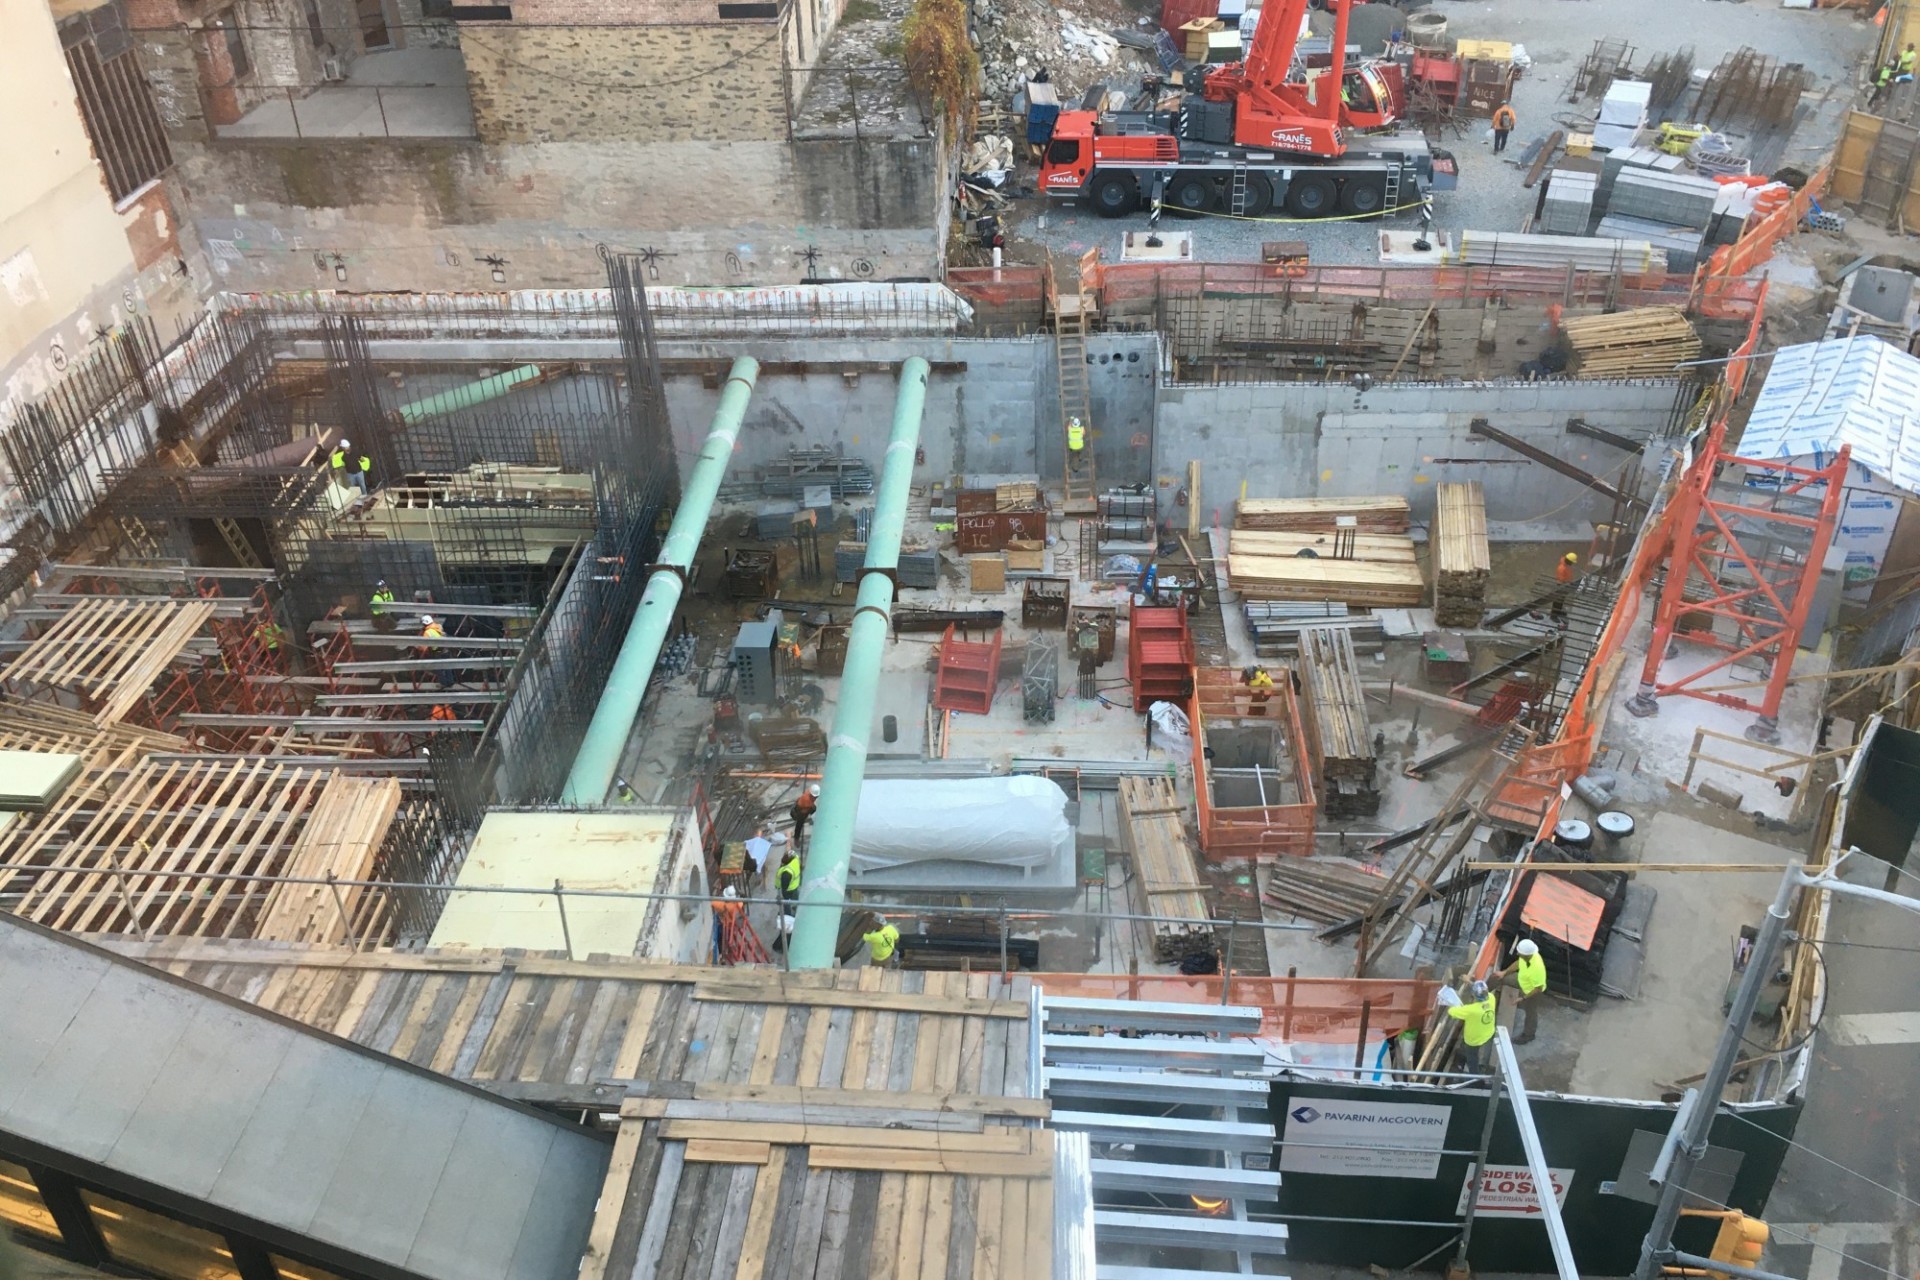 A aerial view of the 600 W. 125th Street construction site, full of materials and large green pipes running overhead. 